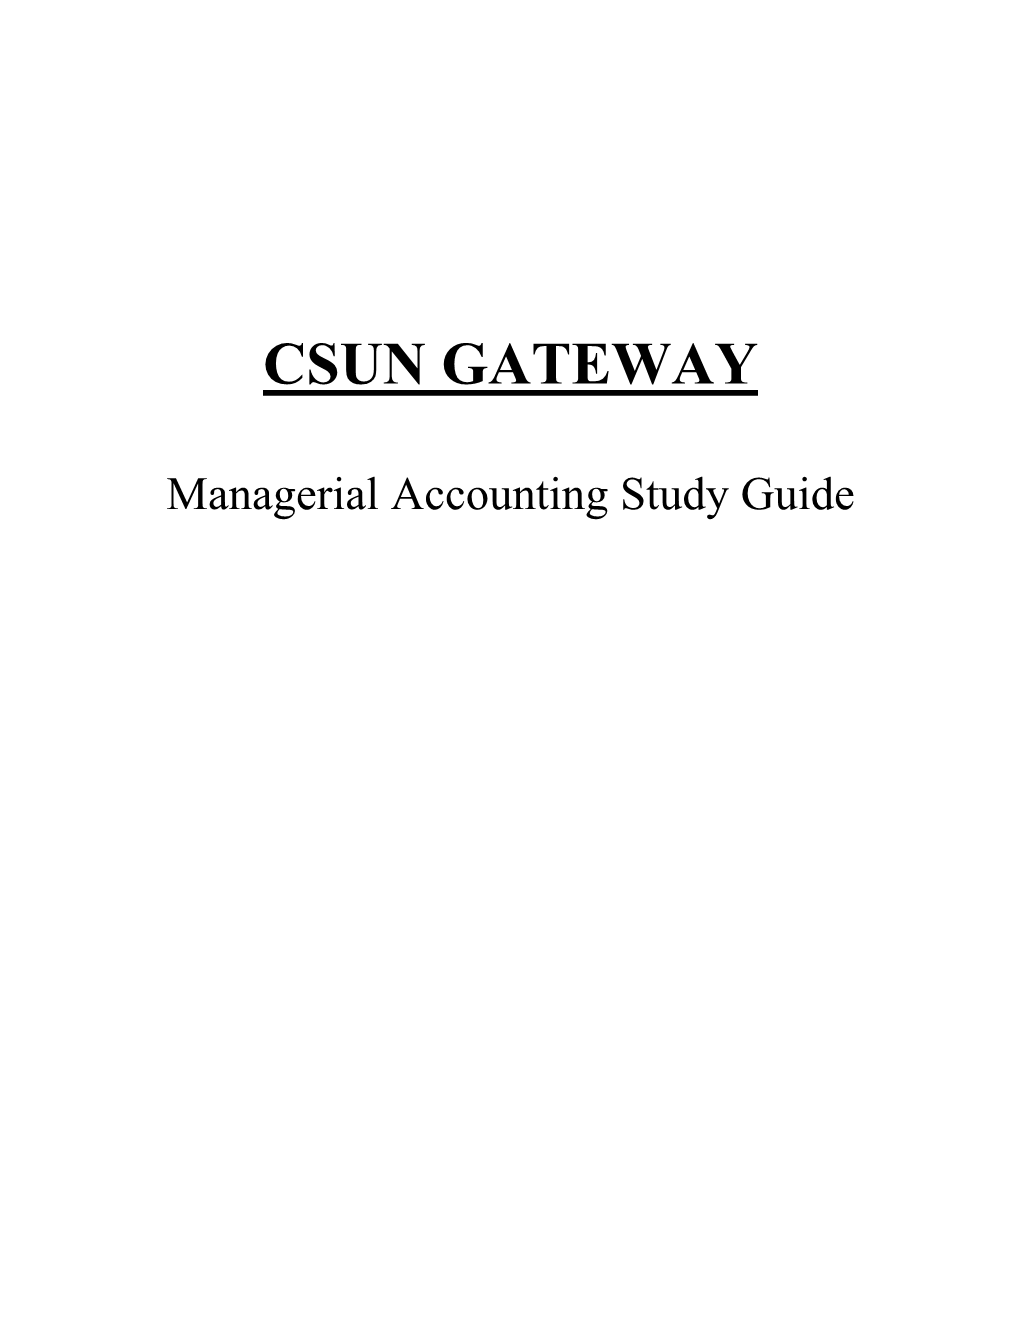 Gateway Managerial Accounting Master.Pdf